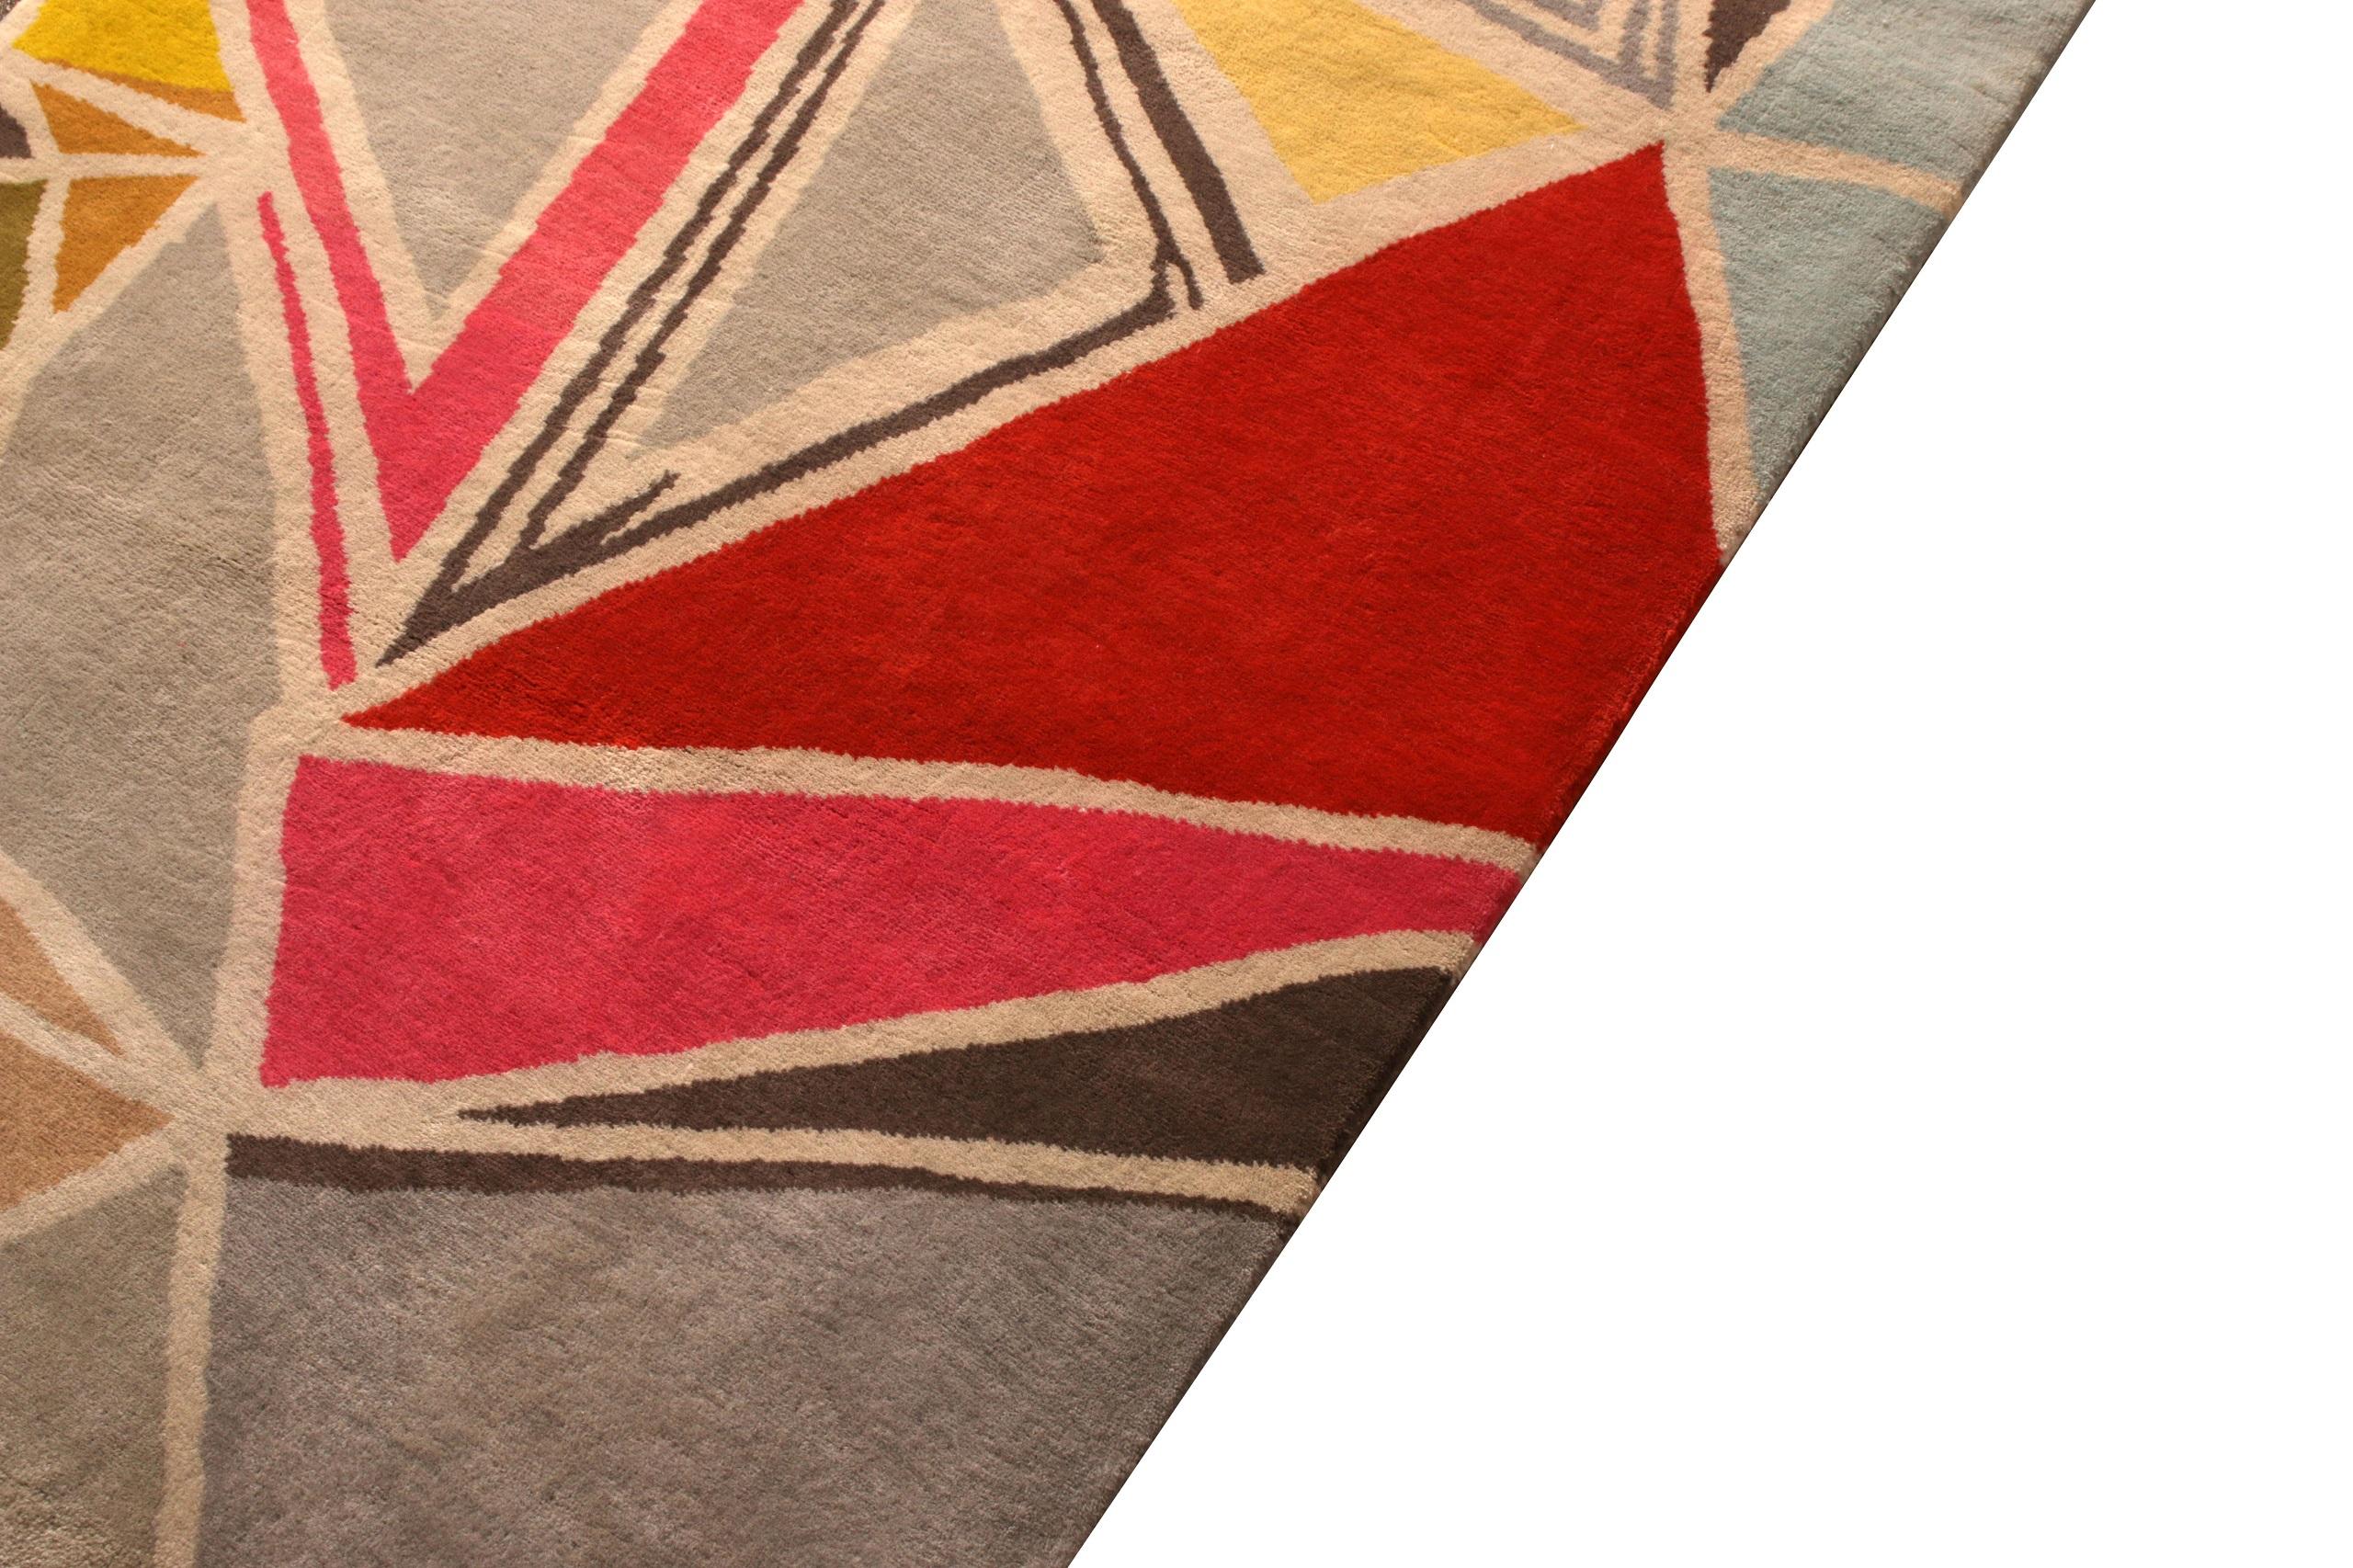 Divine Colorful Mid Century Modern Rug. Country of Origin: India/ Circa Date: Modern - Size: 3 ft 1 in x 5 ft 11 in (0.93 m x 1.80 m)
 